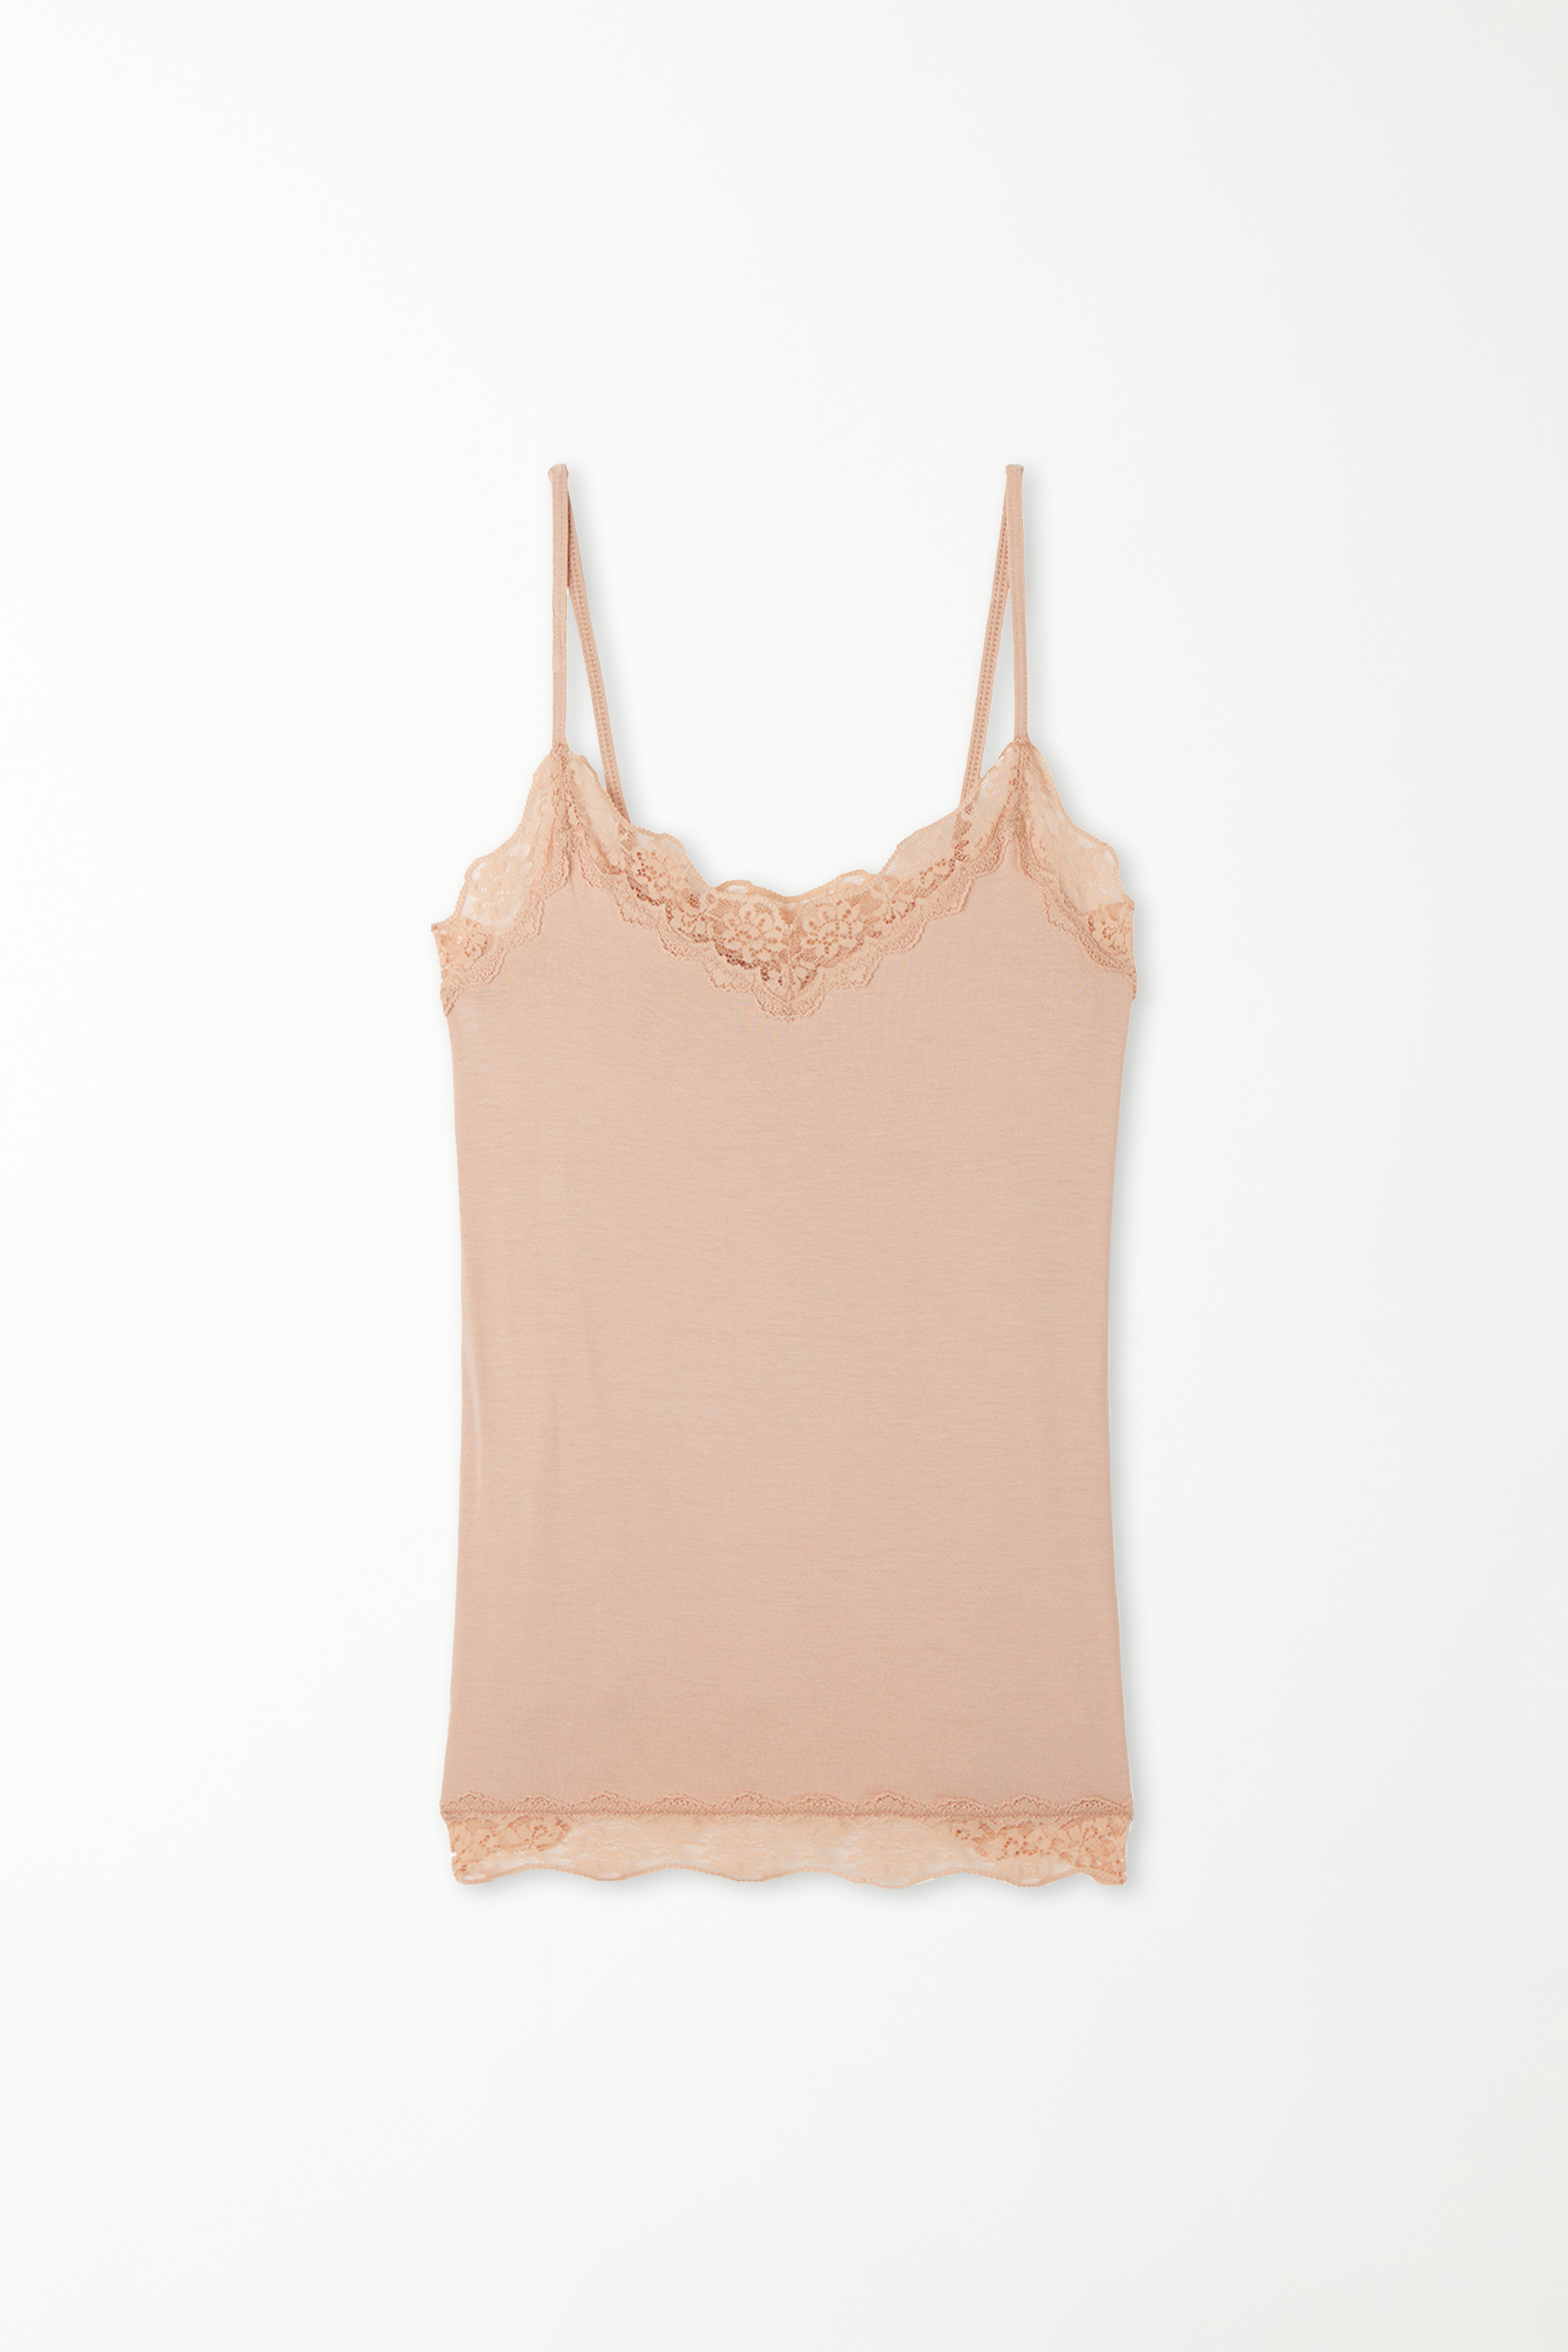 Viscose and Lace Camisole with Thin Shoulder Straps and V-Neck